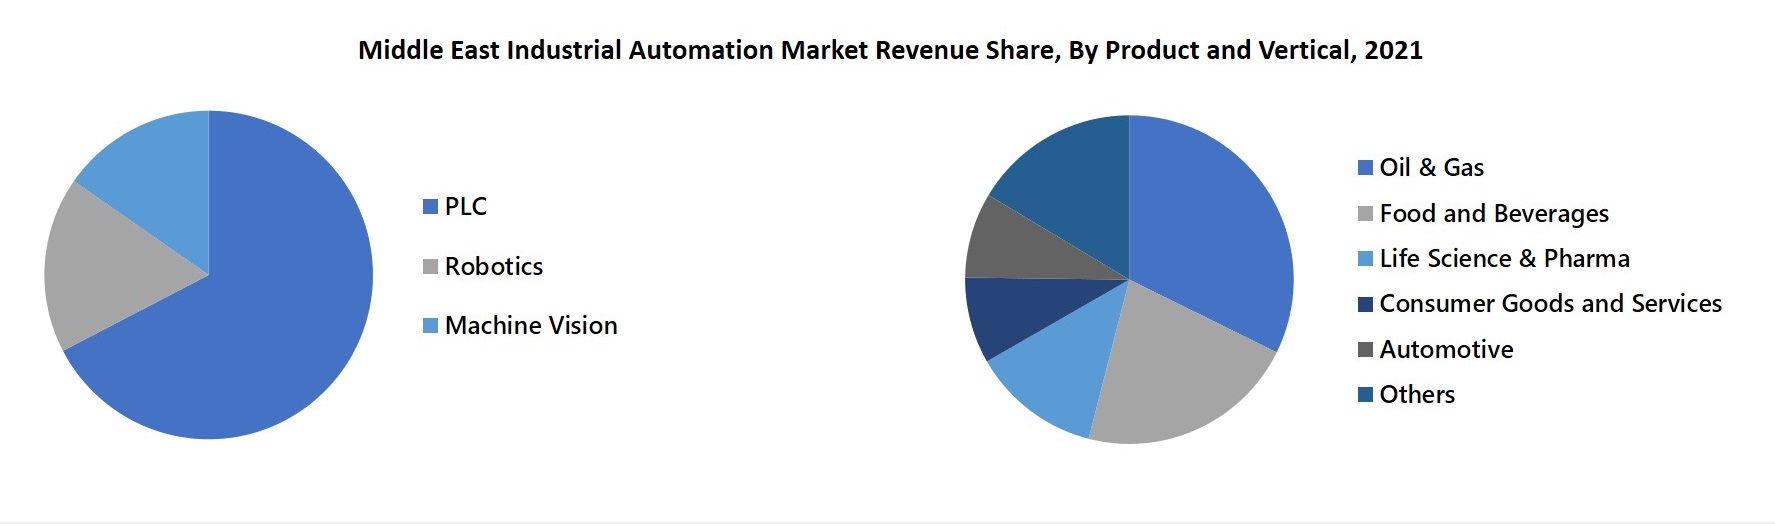 Middle East Industrial Automation Market Revenue Share